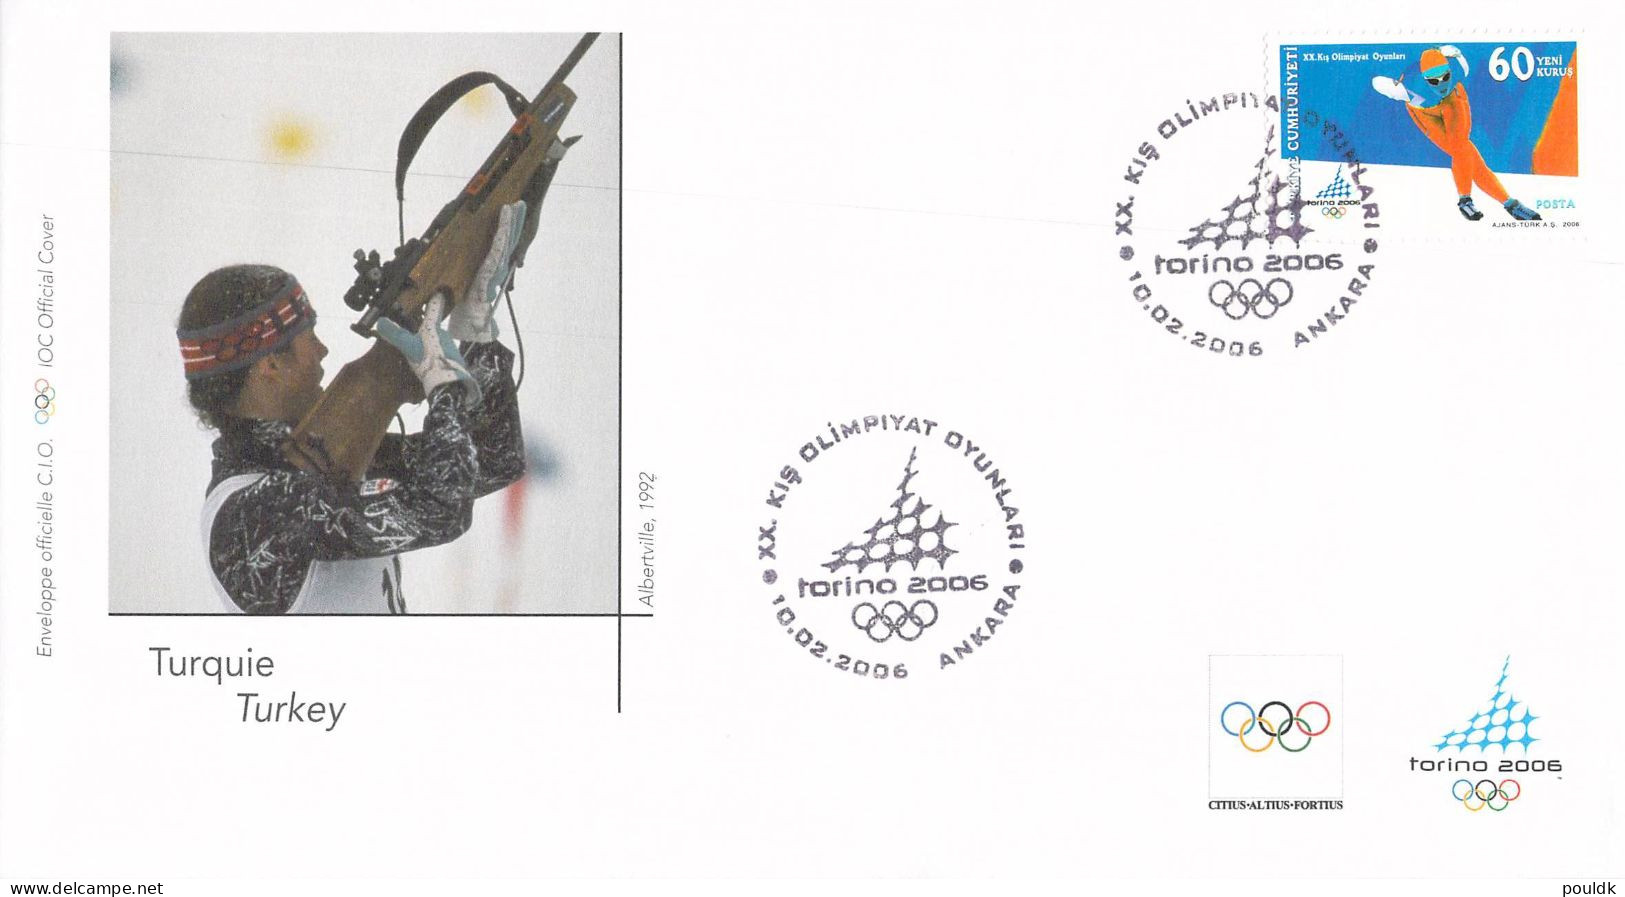 Olympic Games in Torino 2006 - 10 covers. Postal Weight 0,080 kg. Please read Sales Conditions under Image of Lot (009-1